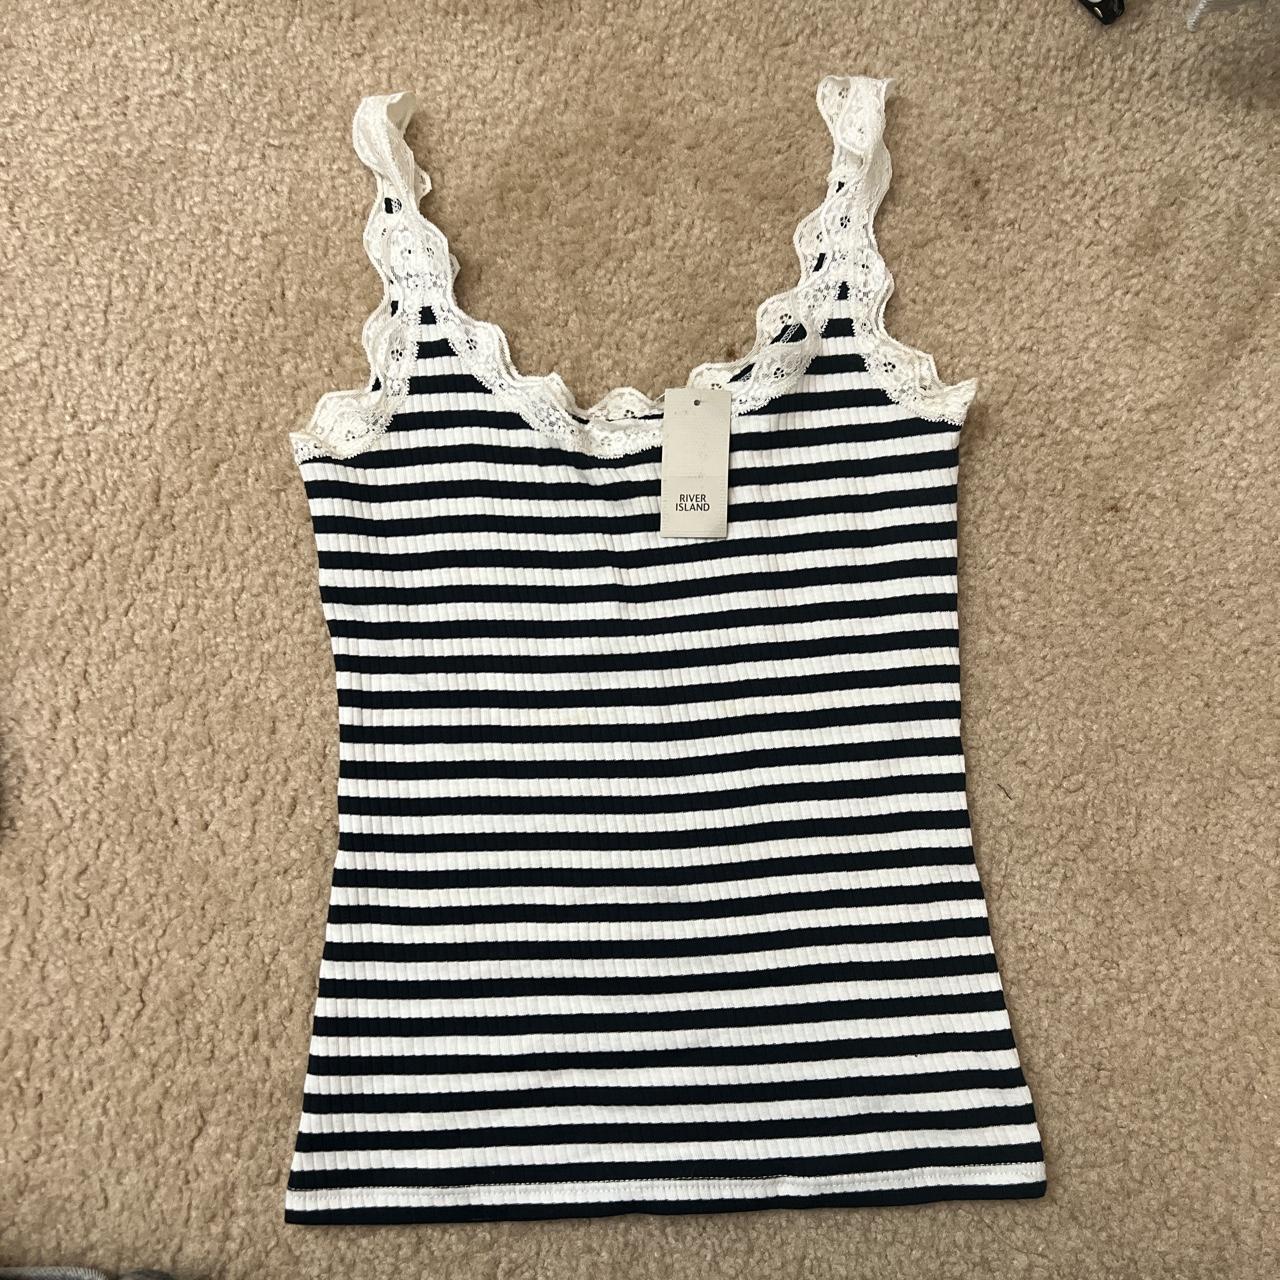 NWT striped tank top with lace trim. Fits like a - Depop